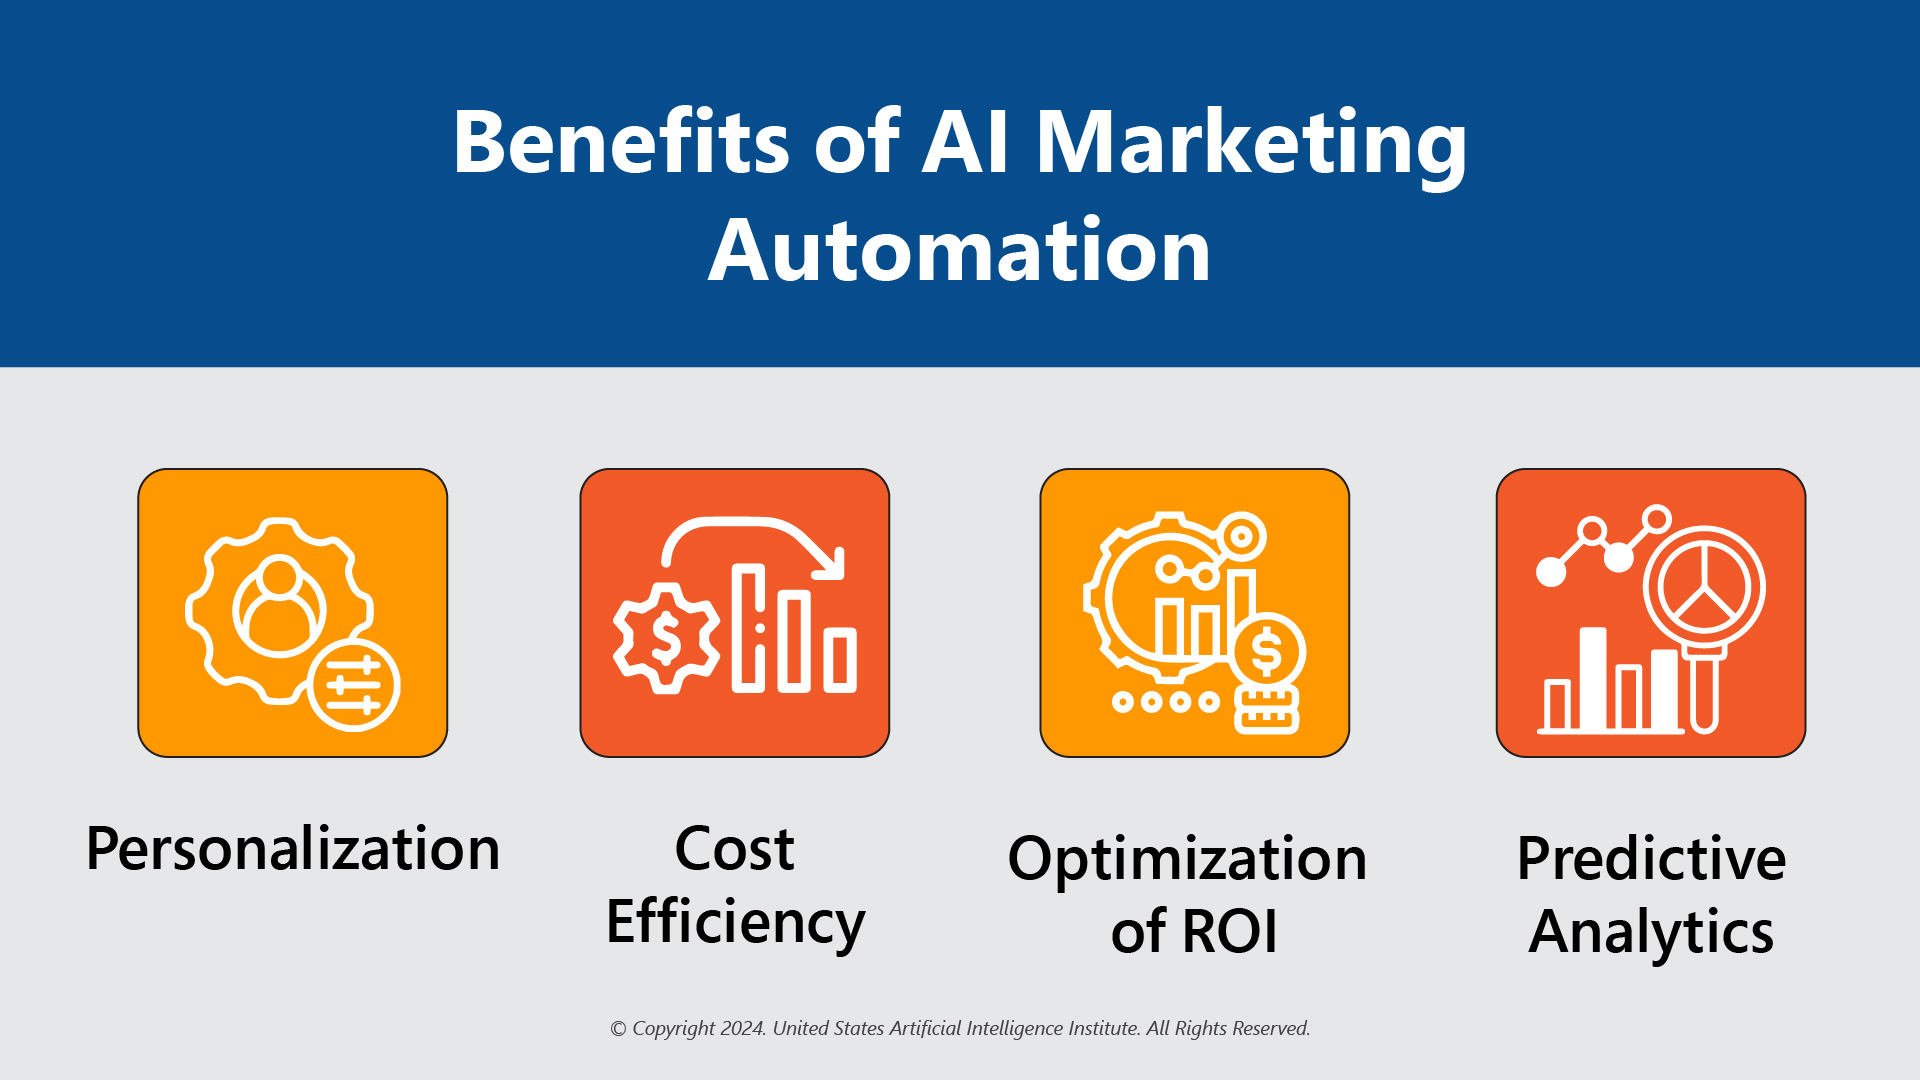 Benefits of using AI Tools in Marketing